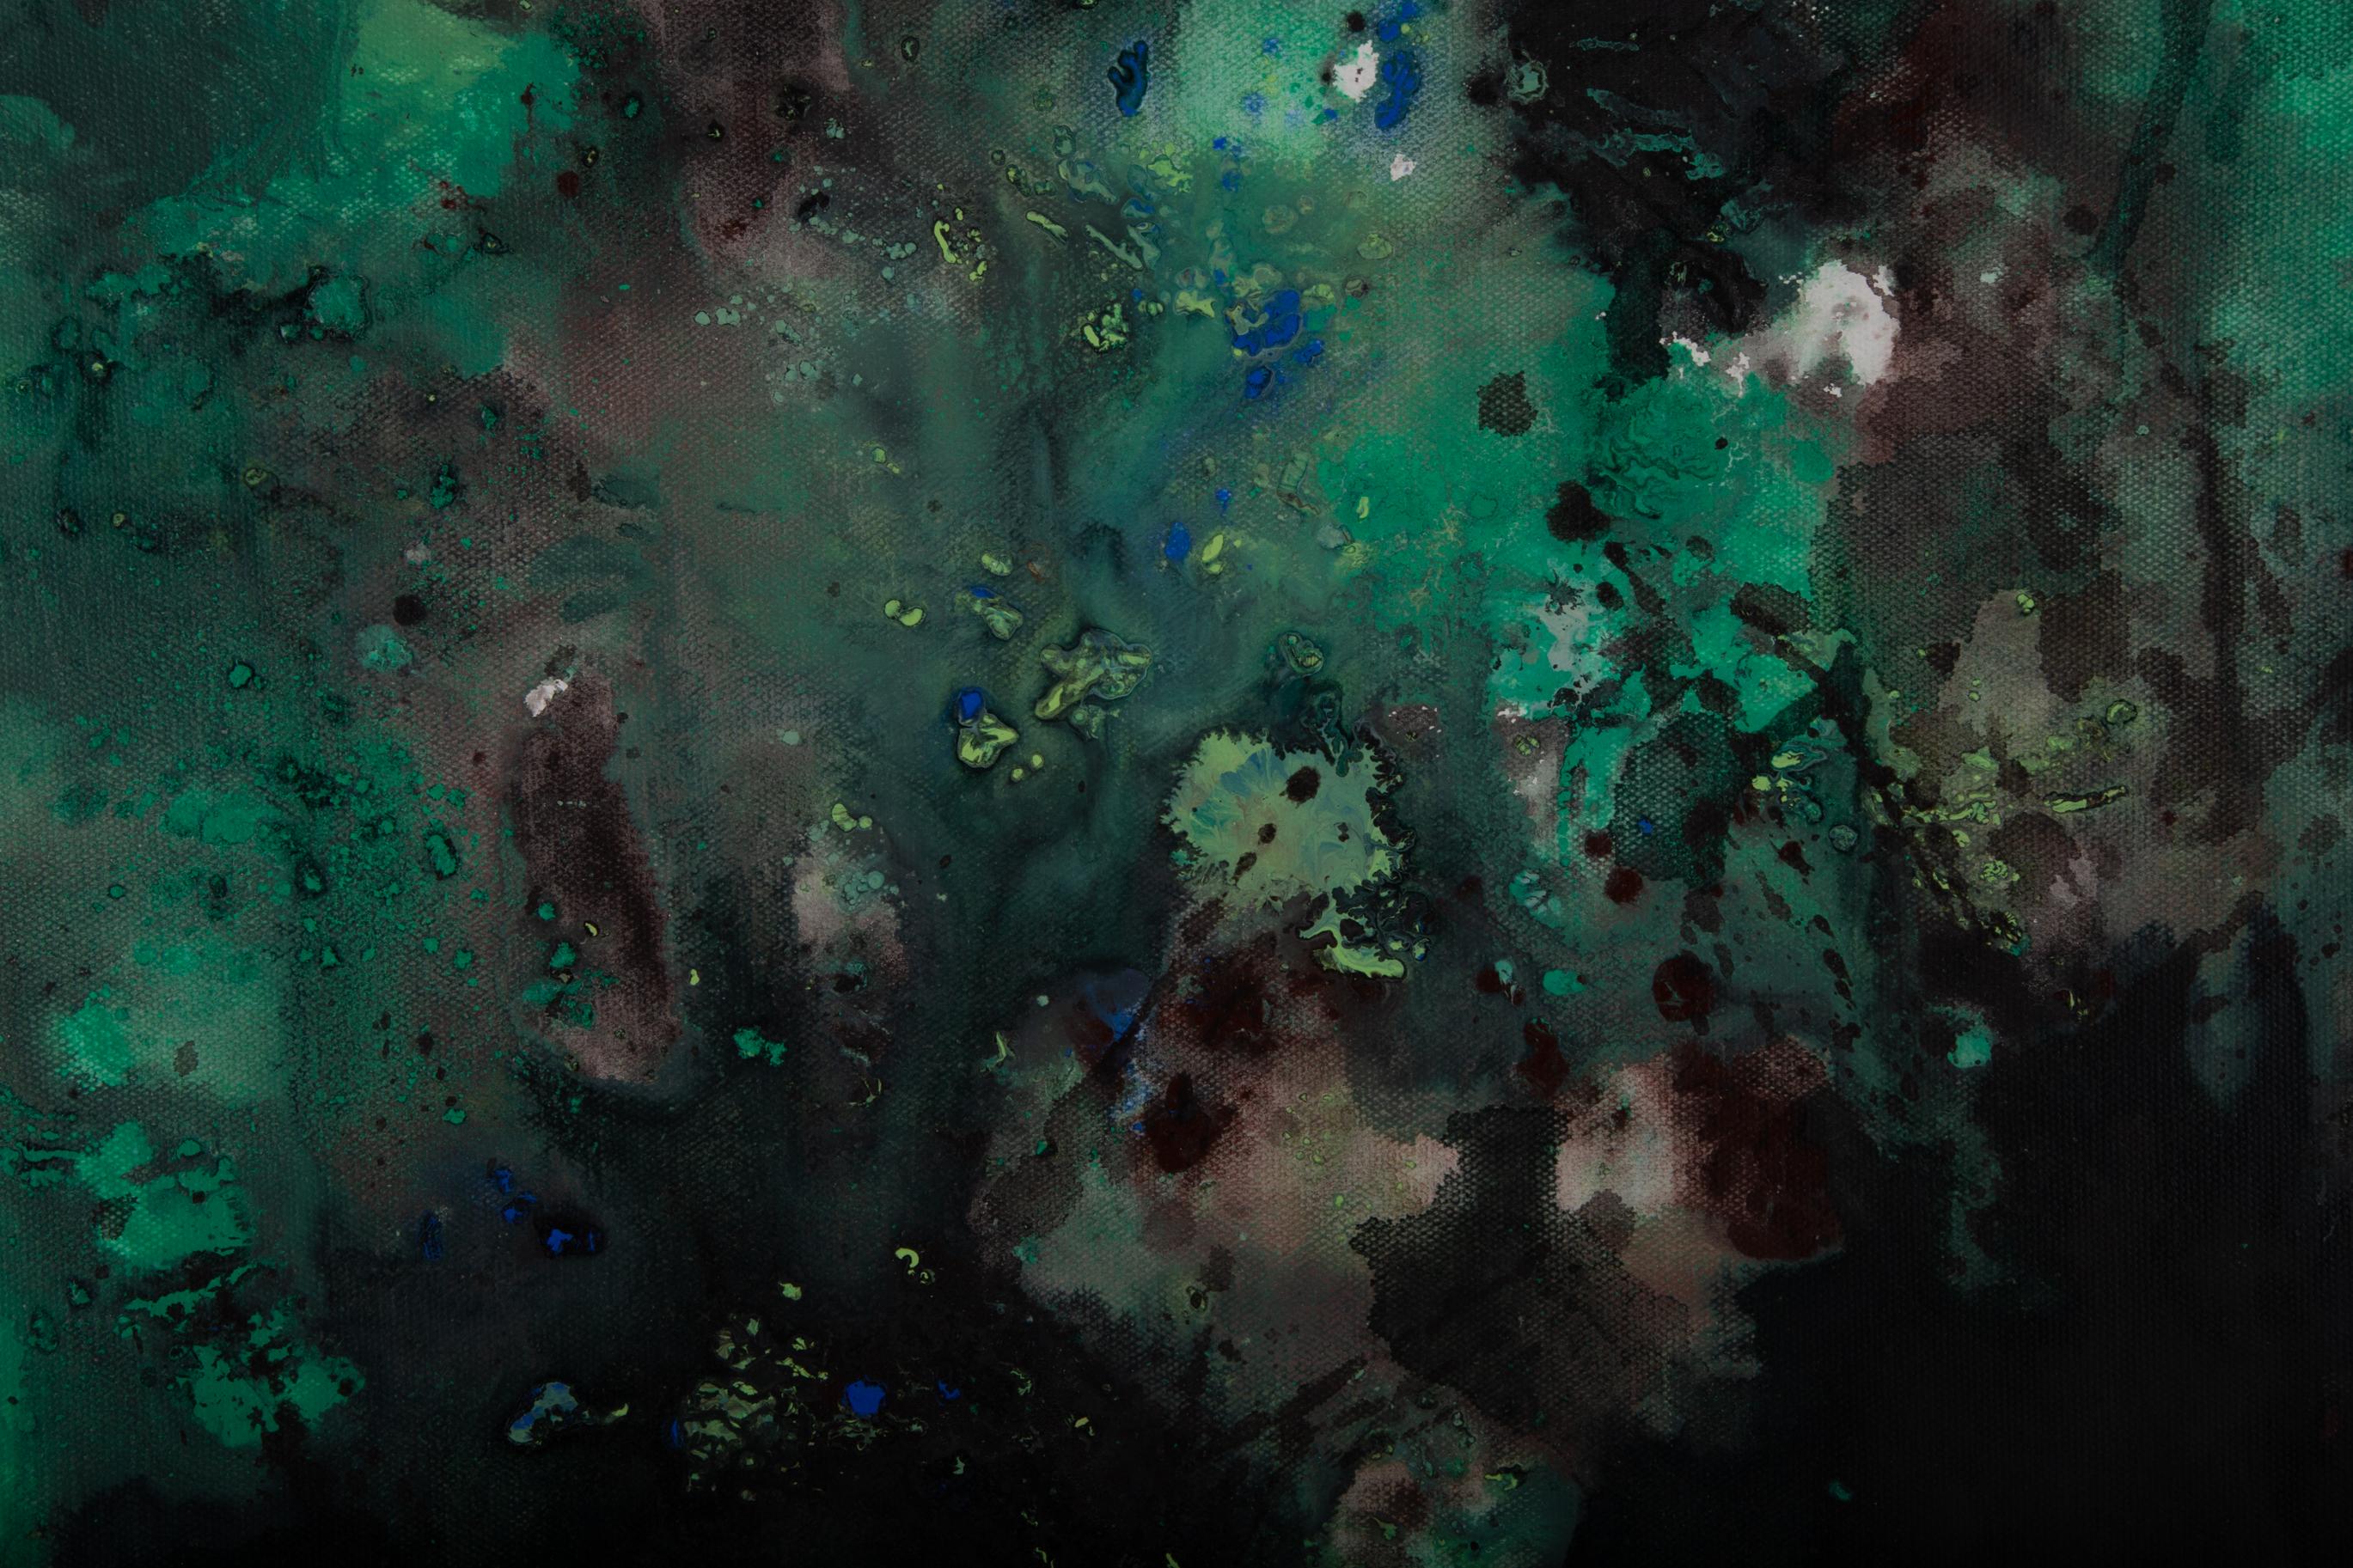 Chong Liu Abstract Original Oil On Canvas The Beginning Of Nature-Green In Black For Sale 5